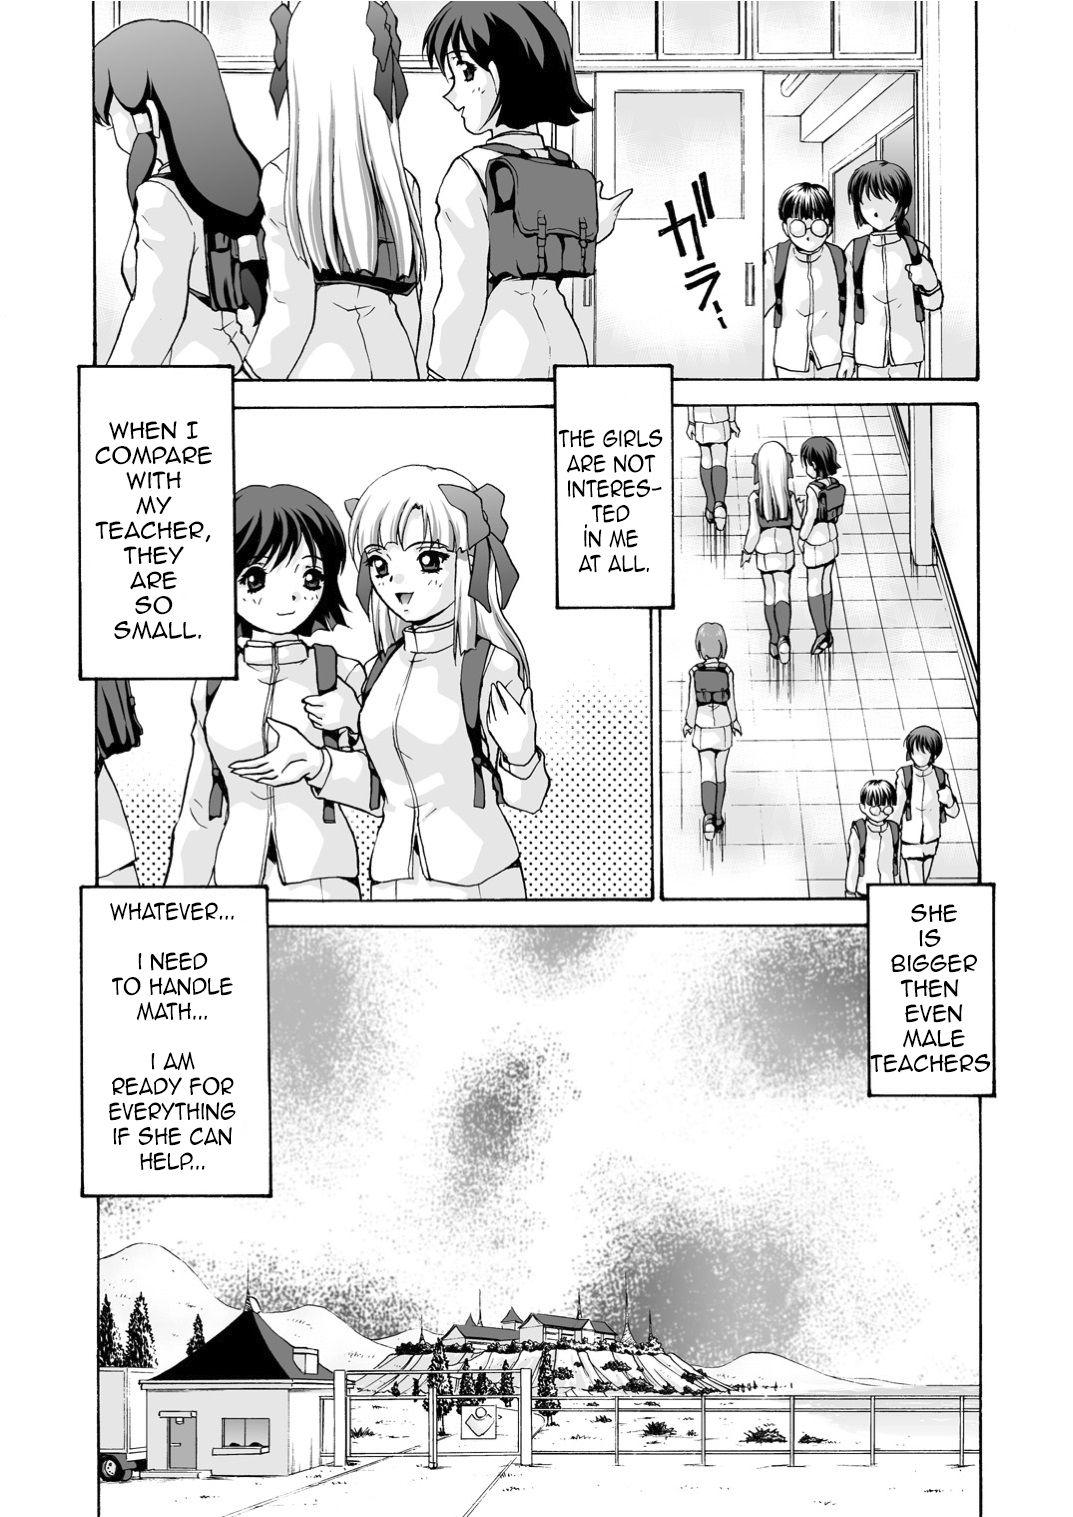 Casting An Injection of Miss Mamiko Roundass - Page 6